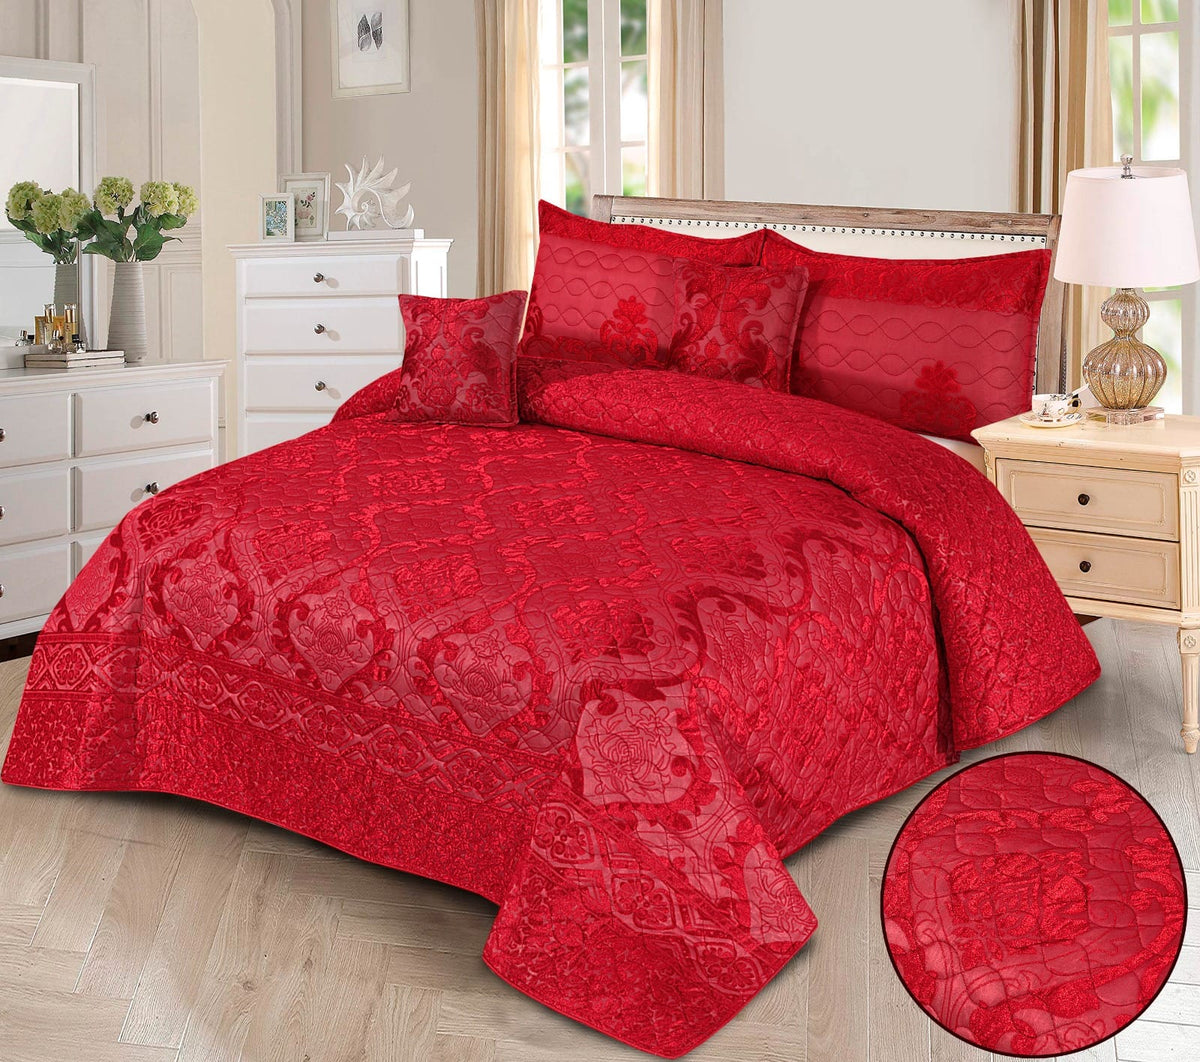 HEAVY PLACHI FULLY QUILTED BED SPREAD (5PCS) 4103